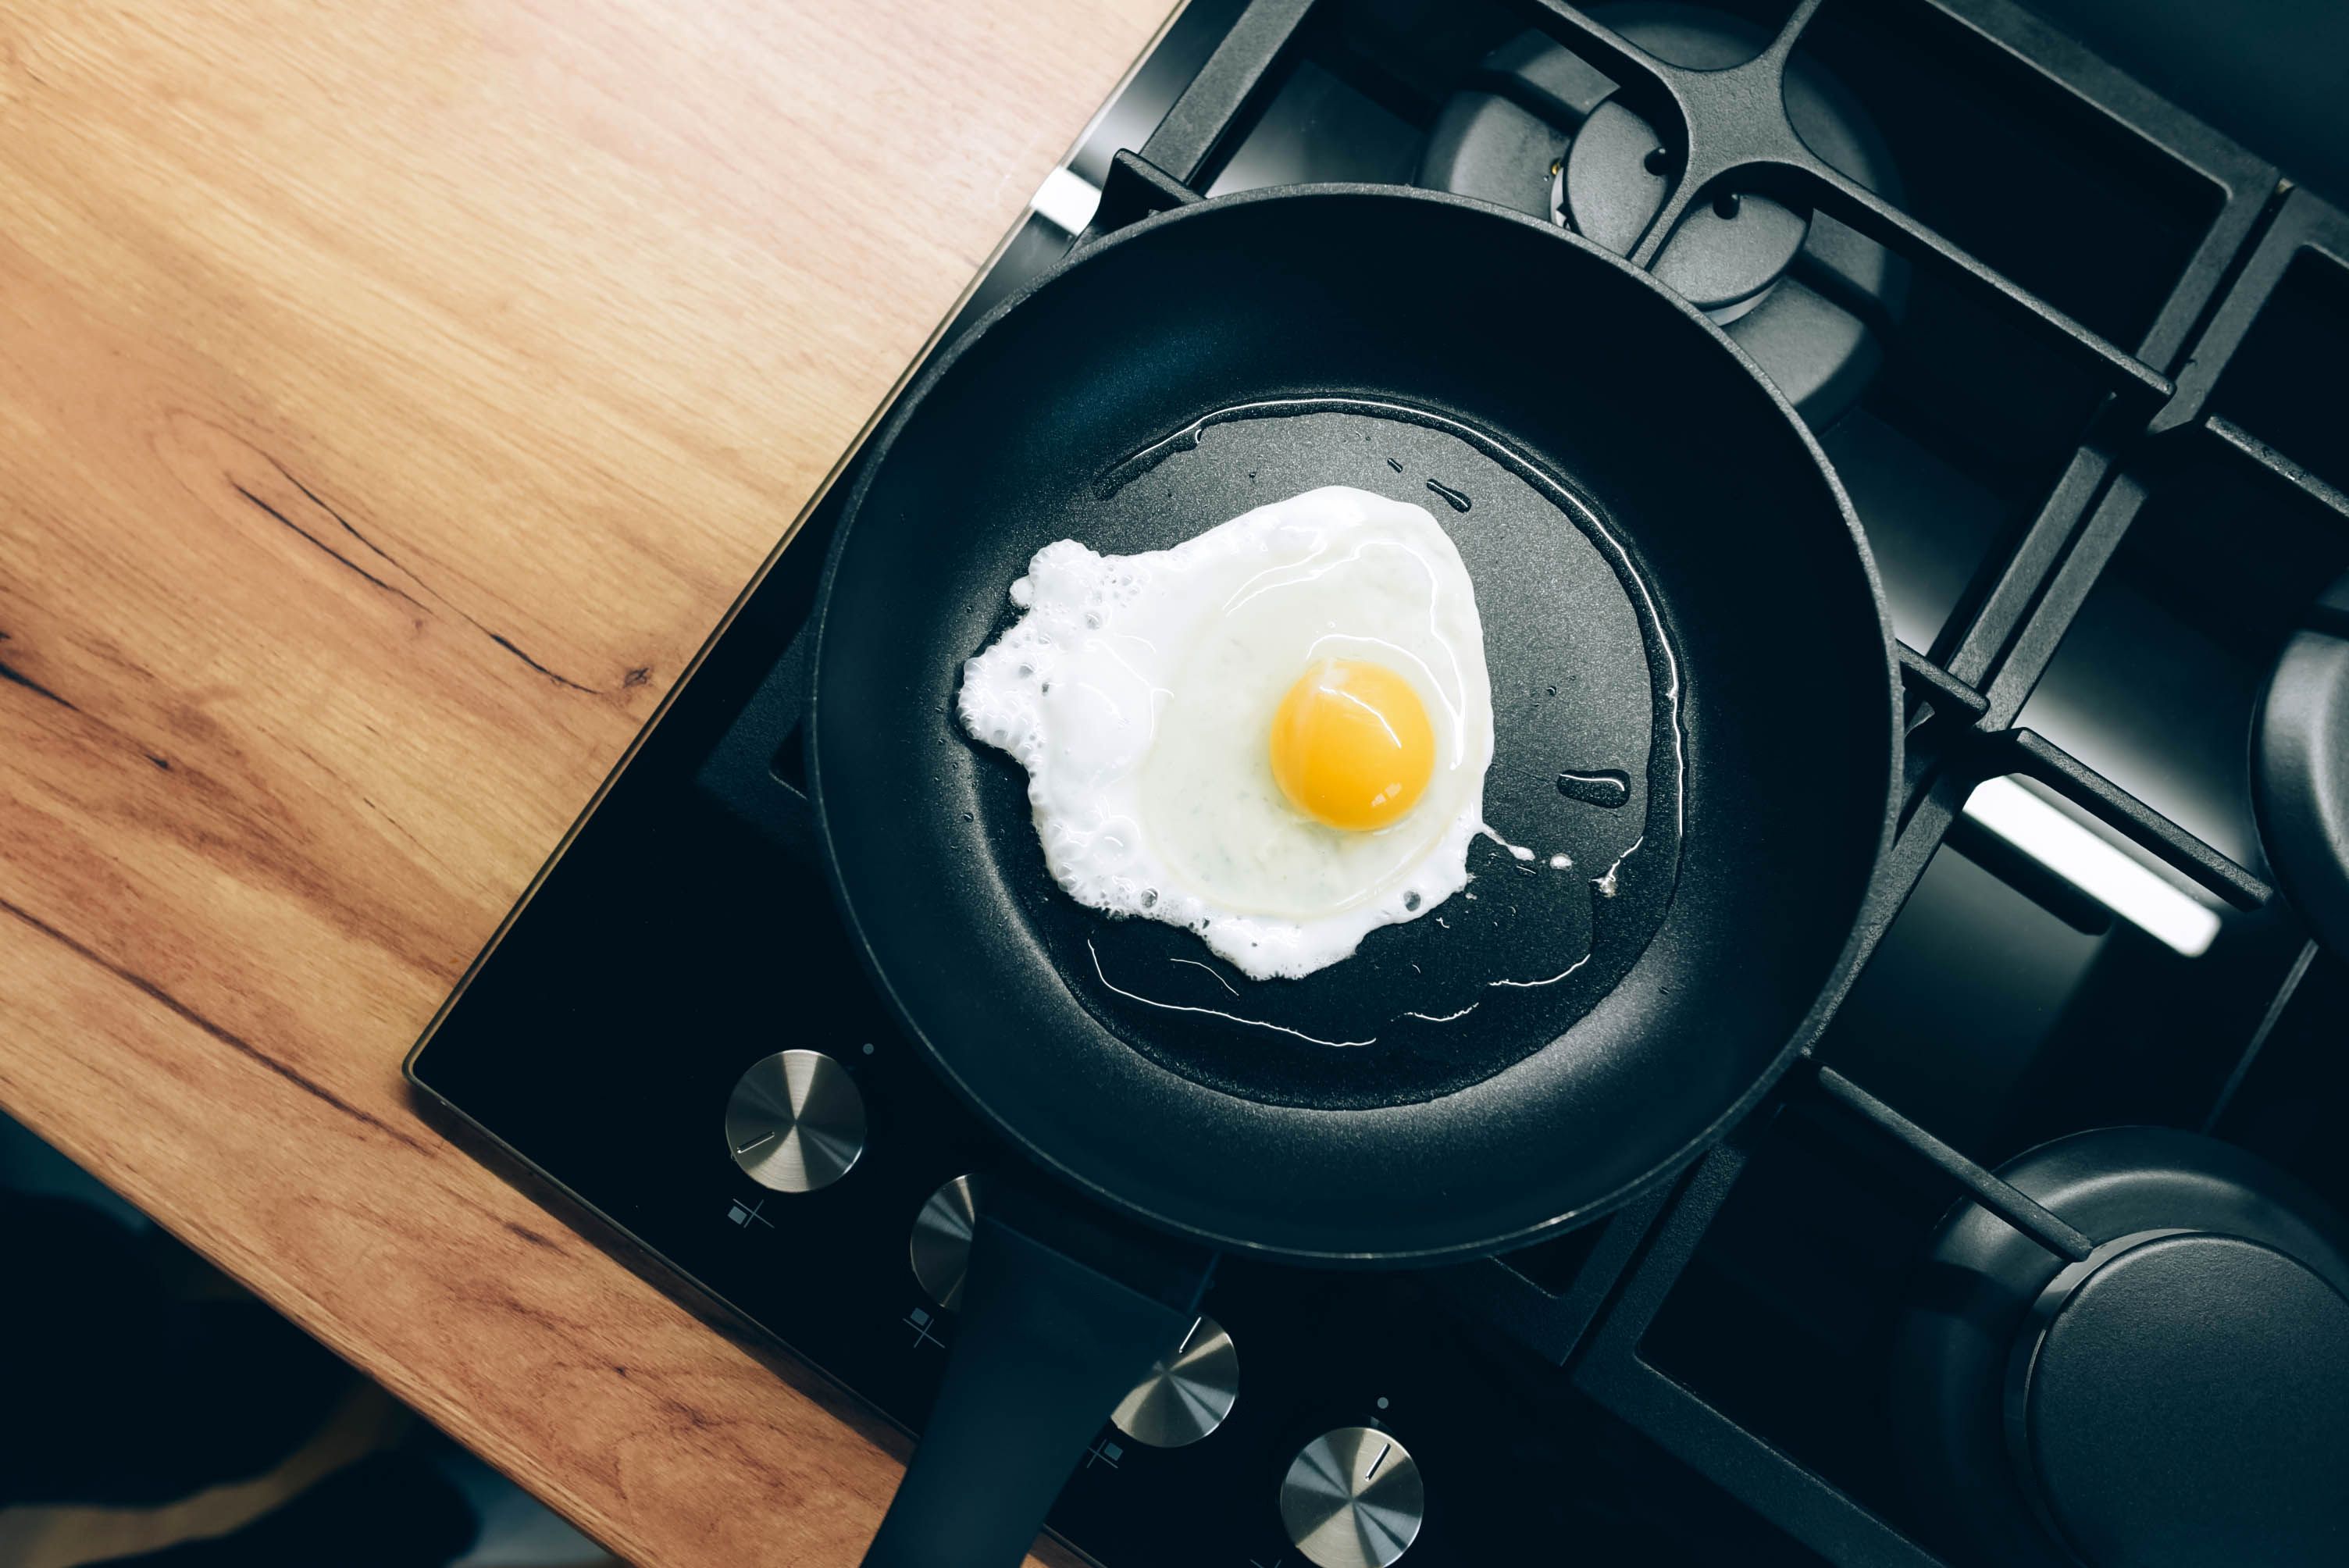 https://hips.hearstapps.com/hmg-prod.s3.amazonaws.com/images/fried-eggs-are-fried-in-a-black-skillet-fried-eggs-royalty-free-image-1644439367.jpg